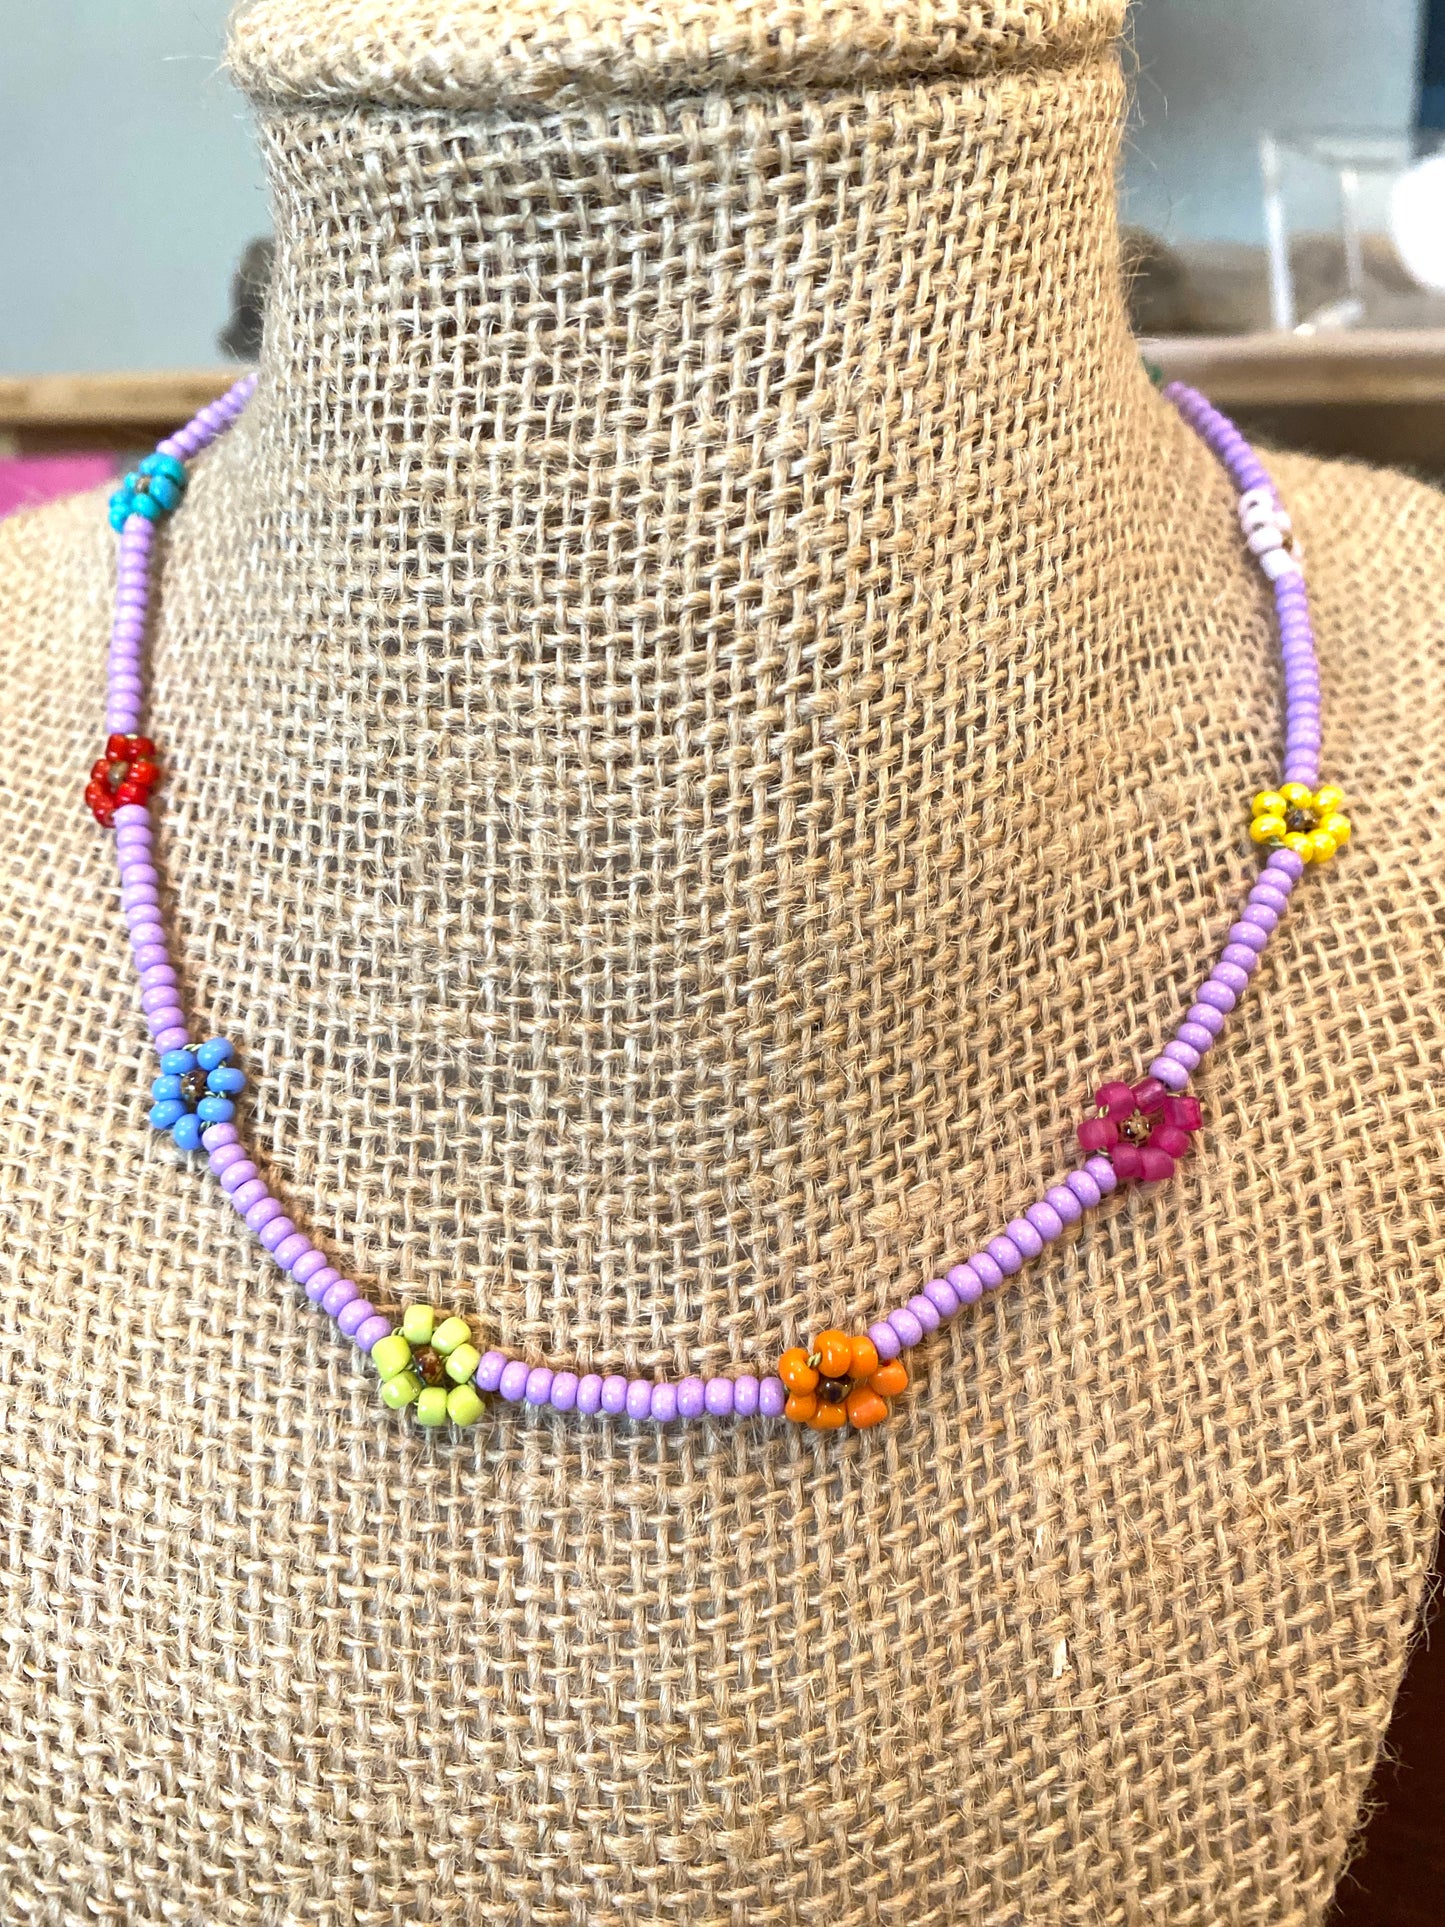 Tiny Lavender Beaded Daisy Chain Necklace With Multi Colored Flowers.